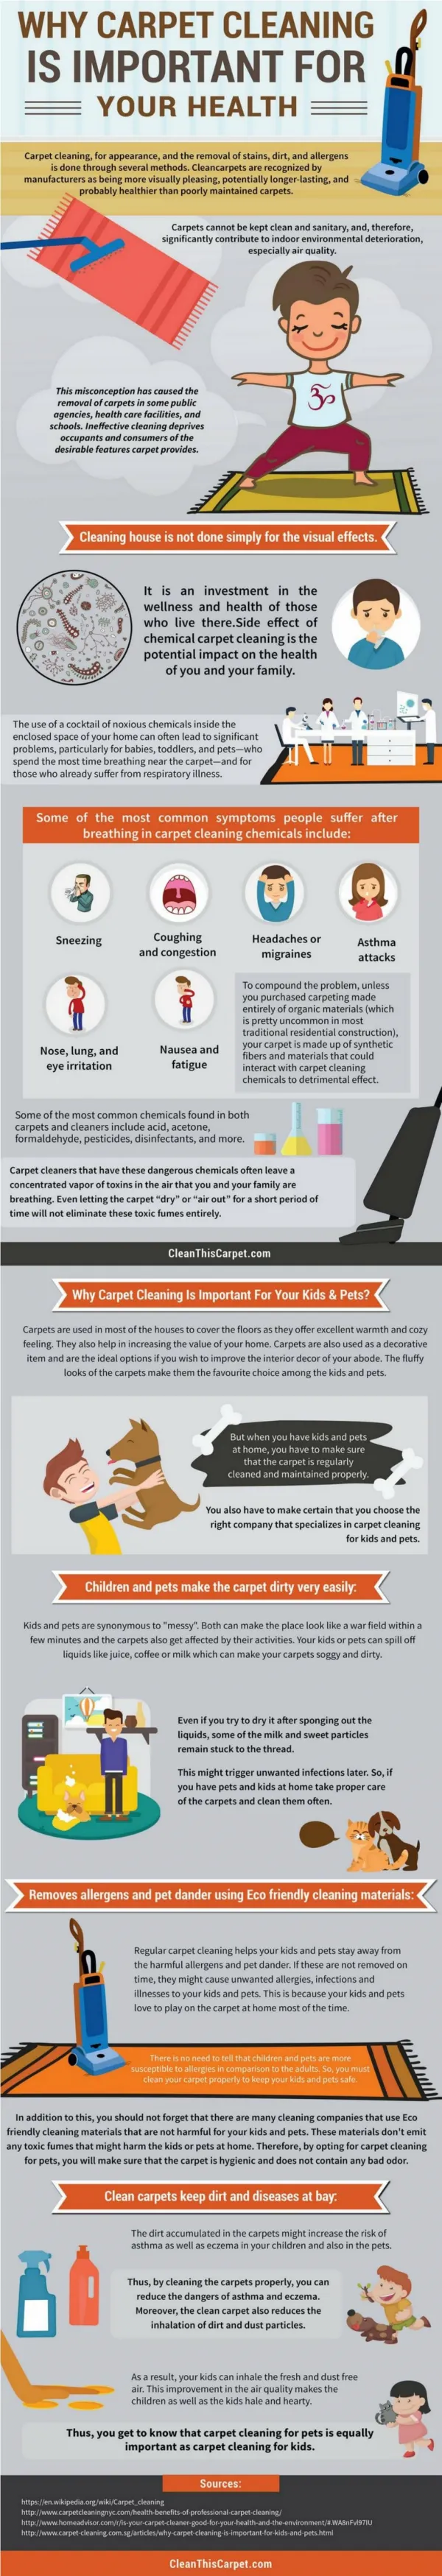 Why carpet cleaning is important for your health